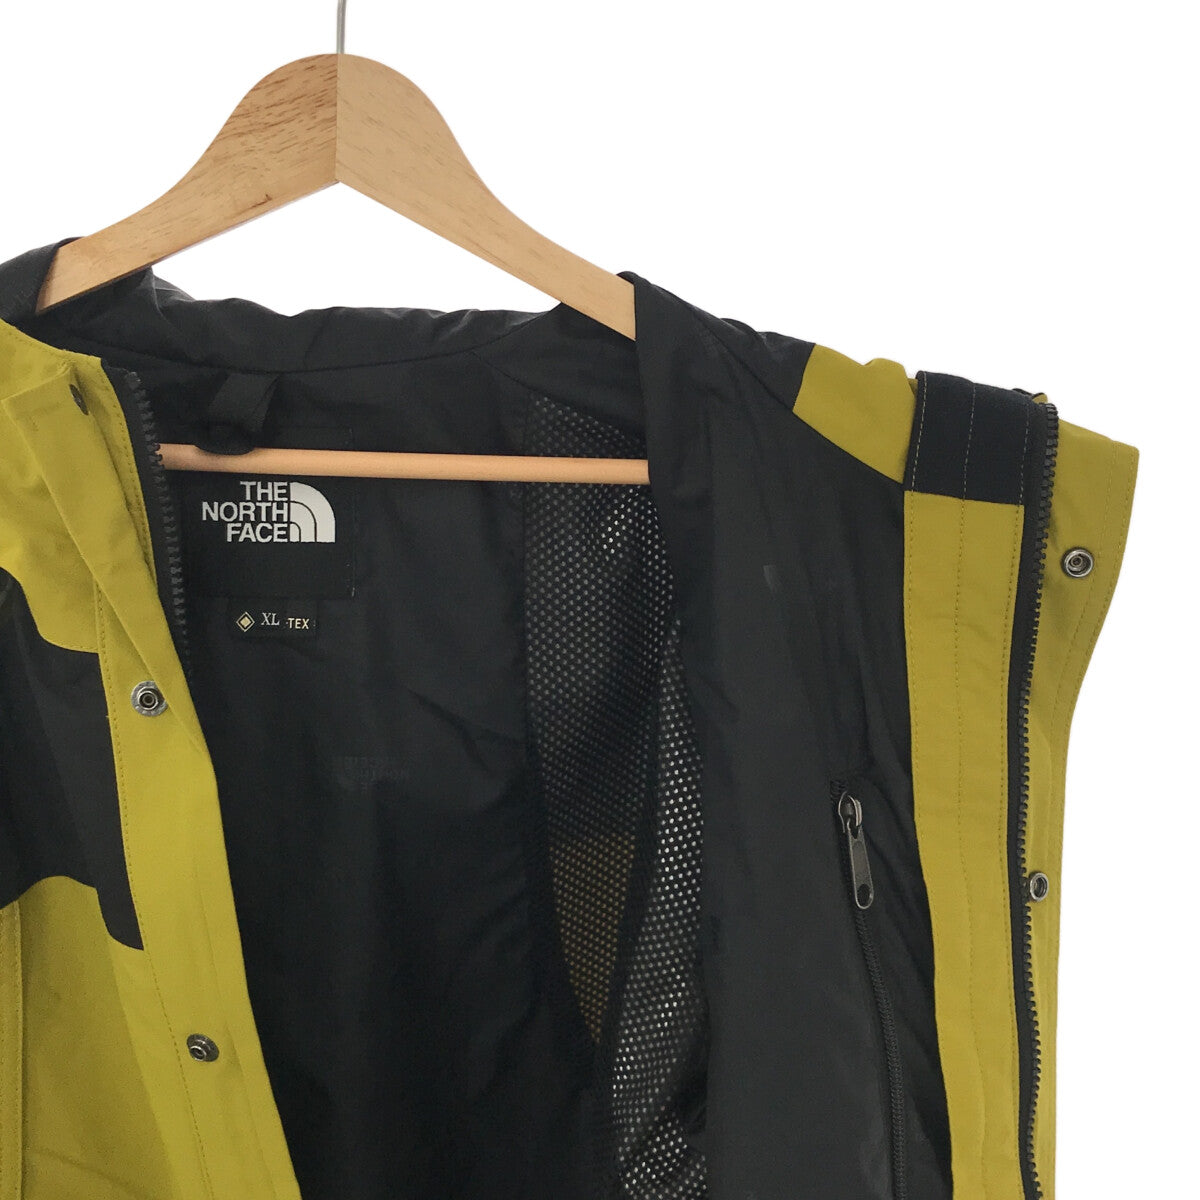 THE NORTH FACE / ザノースフェイス | Mountain Light Jacket